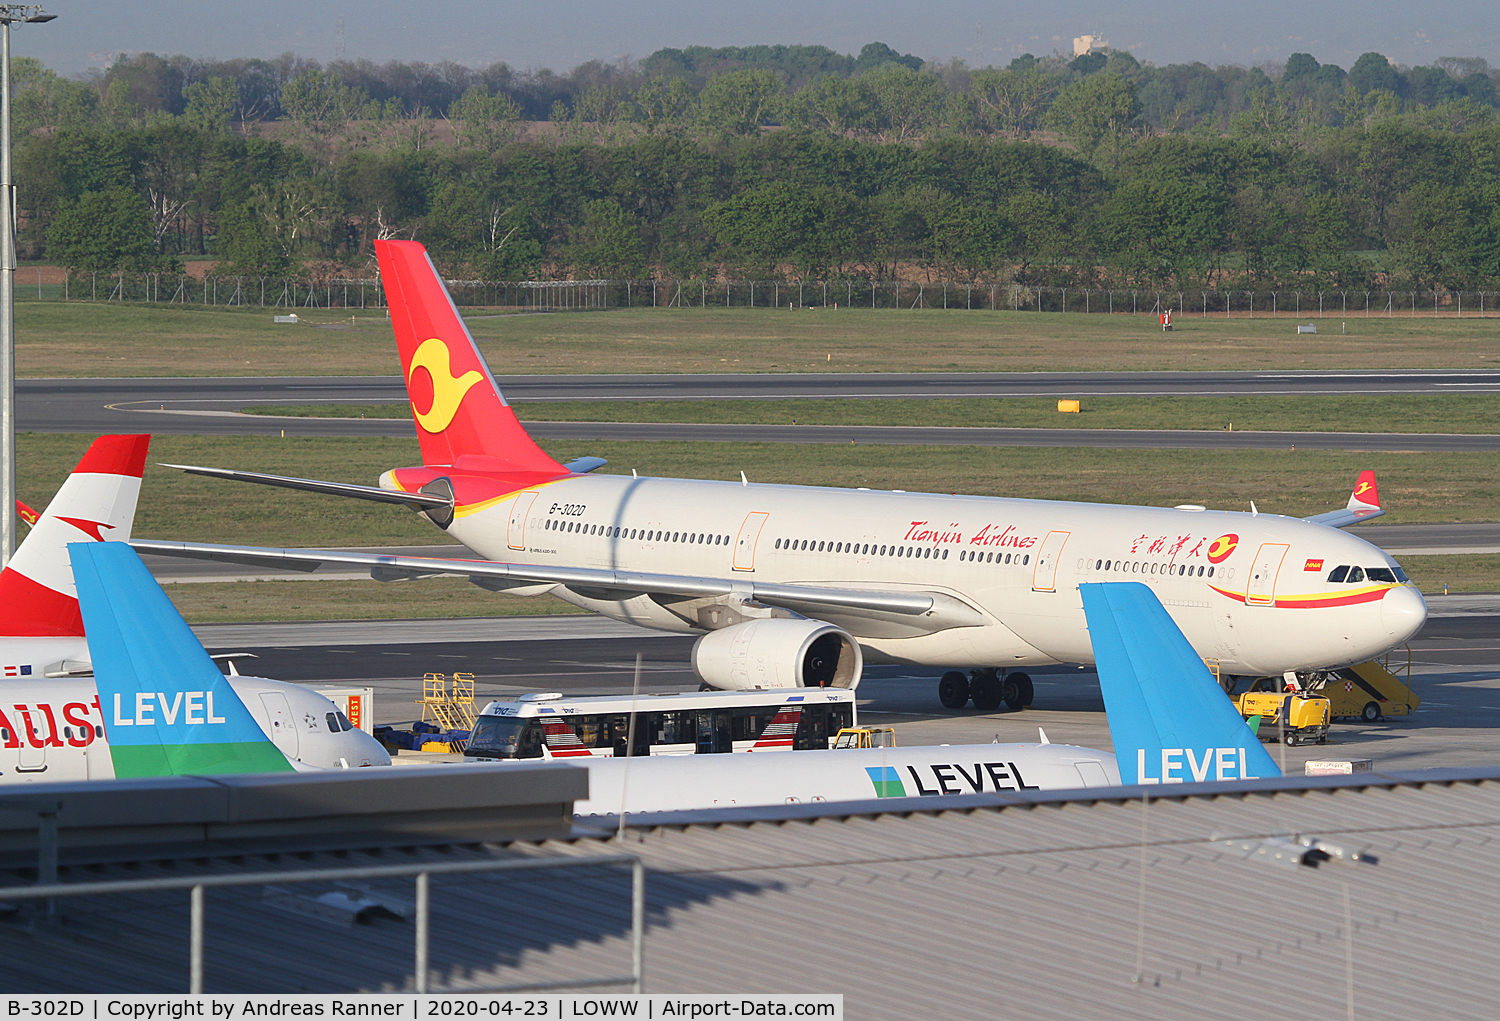 B-302D, 2017 Airbus A330-343E C/N 1849, Tianjin Airlines A330